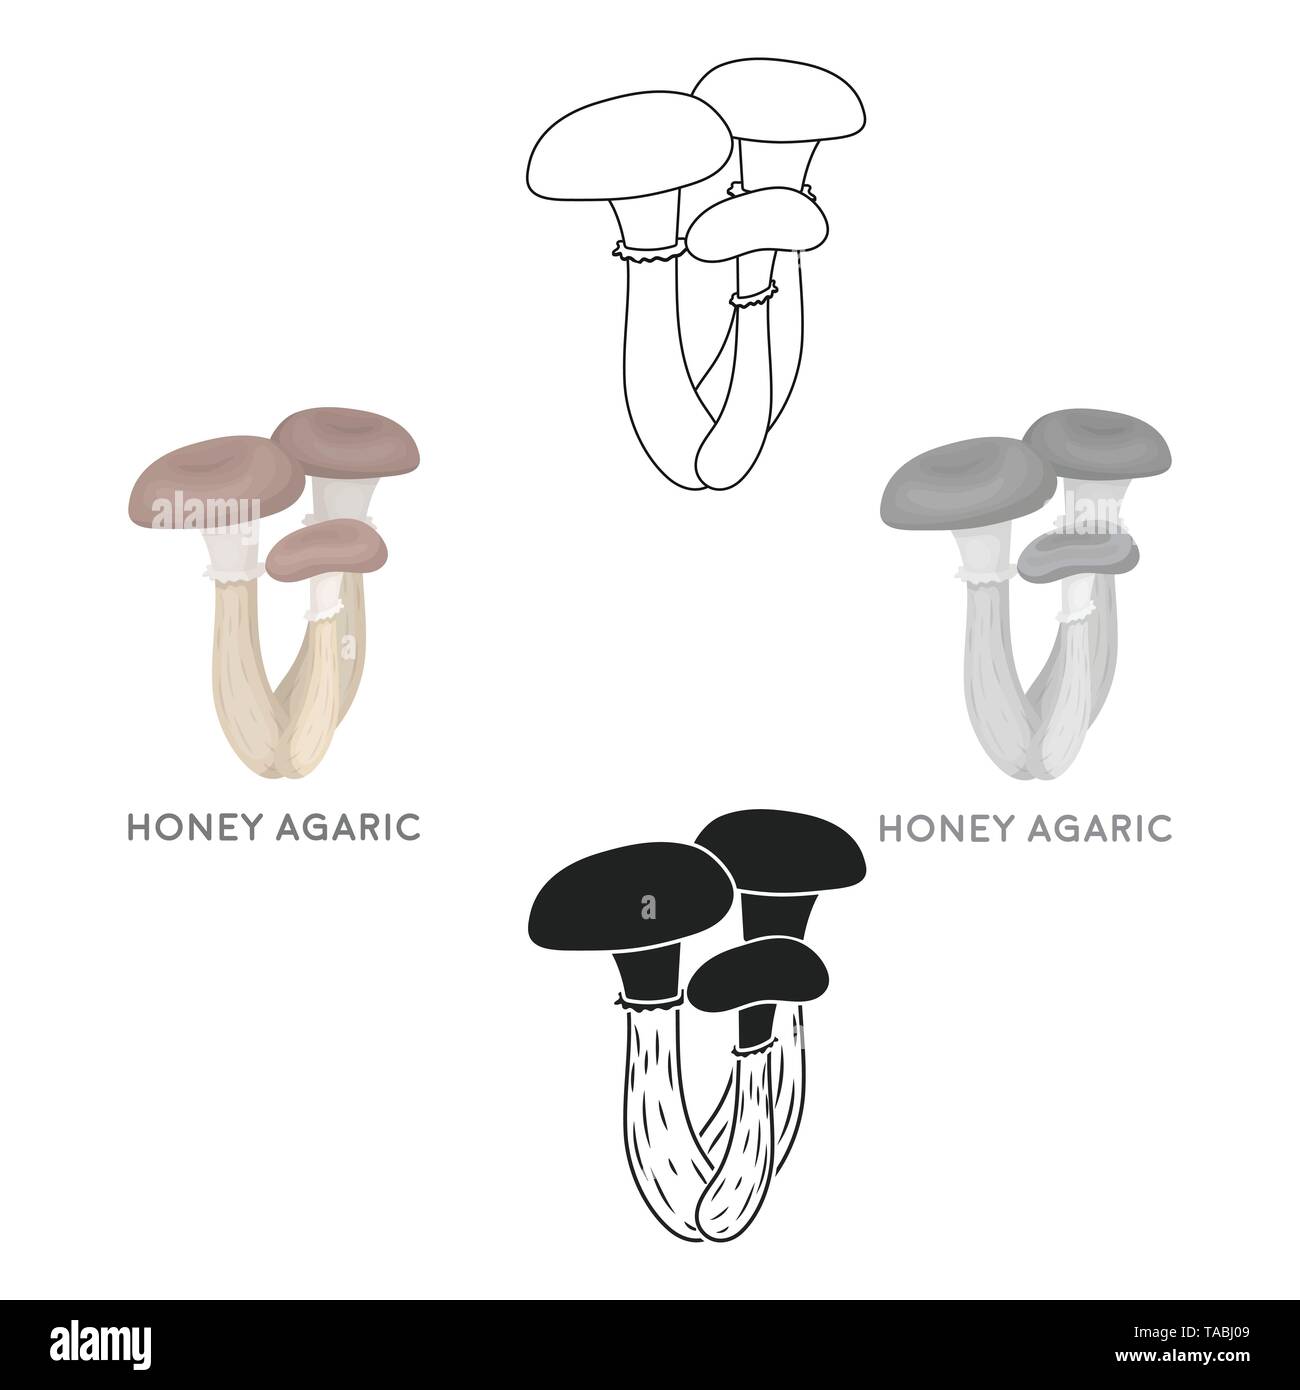 activity,adorable,agaric,art,baby,book,cap,cartoon,black,ccoloring,character,colorless,comic,design,edible,edible mushroom,enible,food,forest,fresh,fun,fungi,fungus,grow,healthy,honey,honey agaric,icon,illustration,isolated,leaf,logo,mushroom,mushroom cartoon,mushroom sketch,mushroom vector,mushrooms isolated,nature,organic,outline,page,painting,plant,sketch,small,summer,symbol,vector,vegetable,vegetarian,web Vector Vectors , Stock Vector